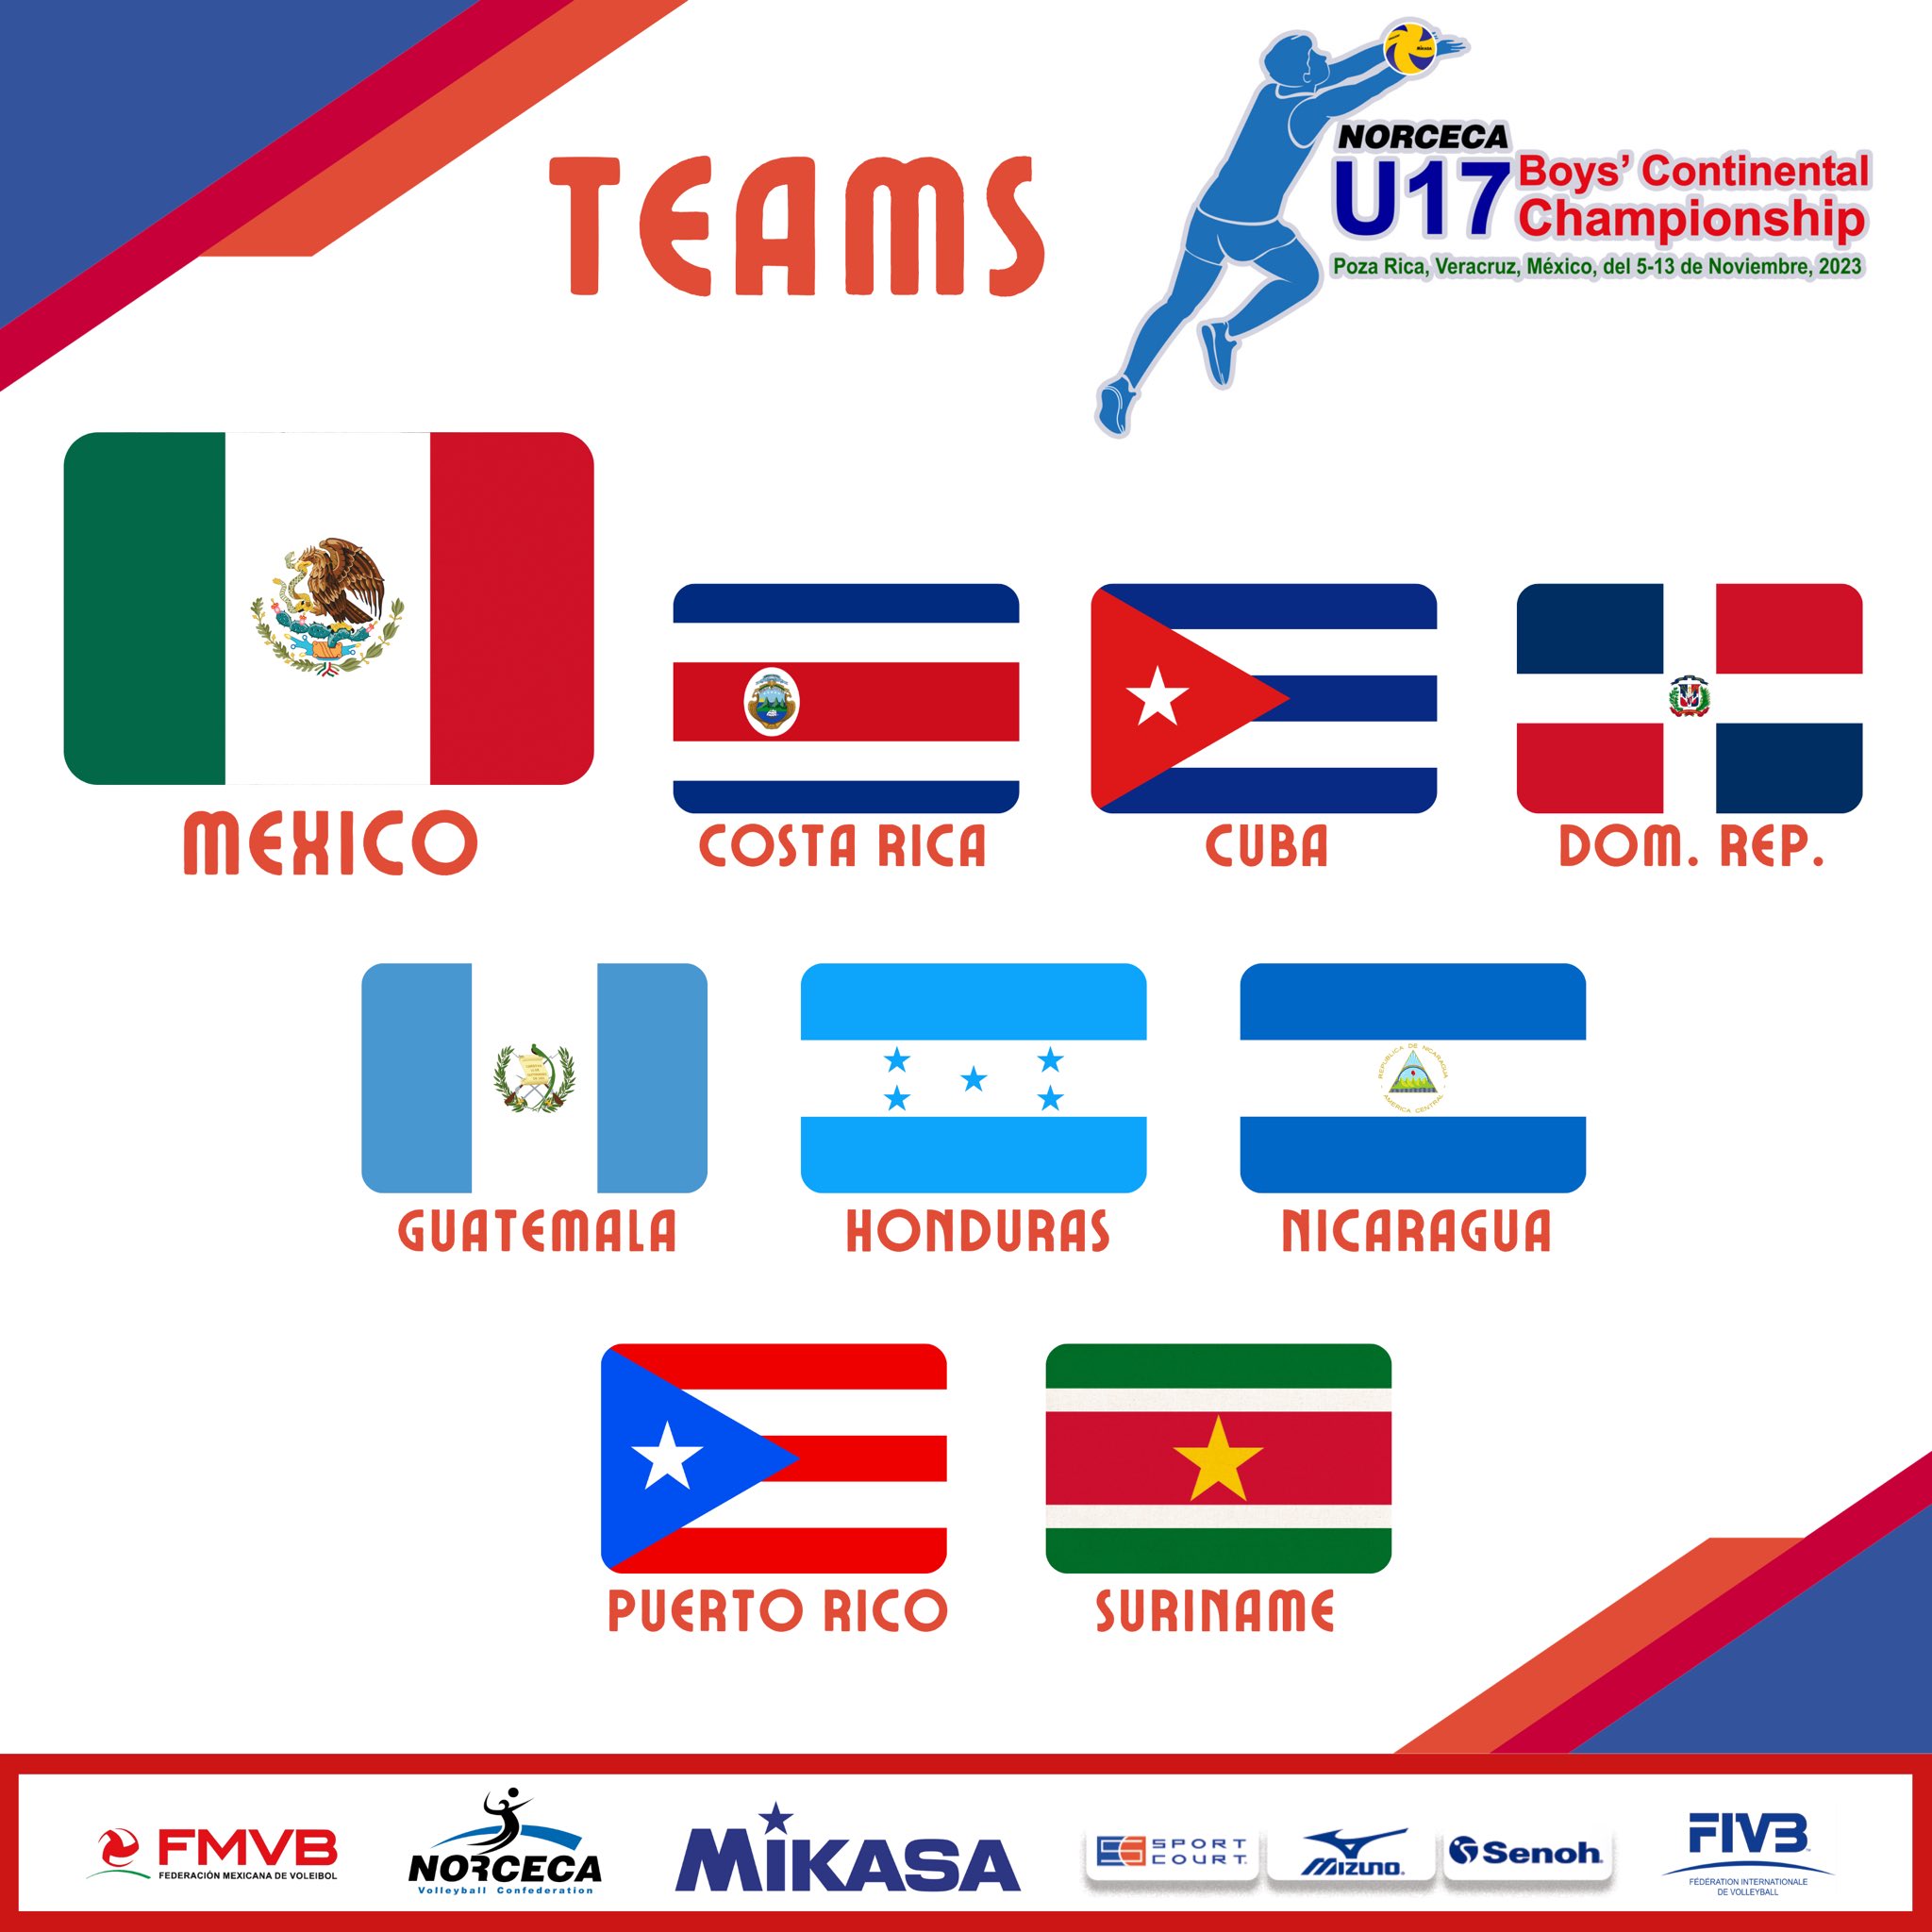 Chile takes fifth place in their first ever Pan American Games – NORCECA